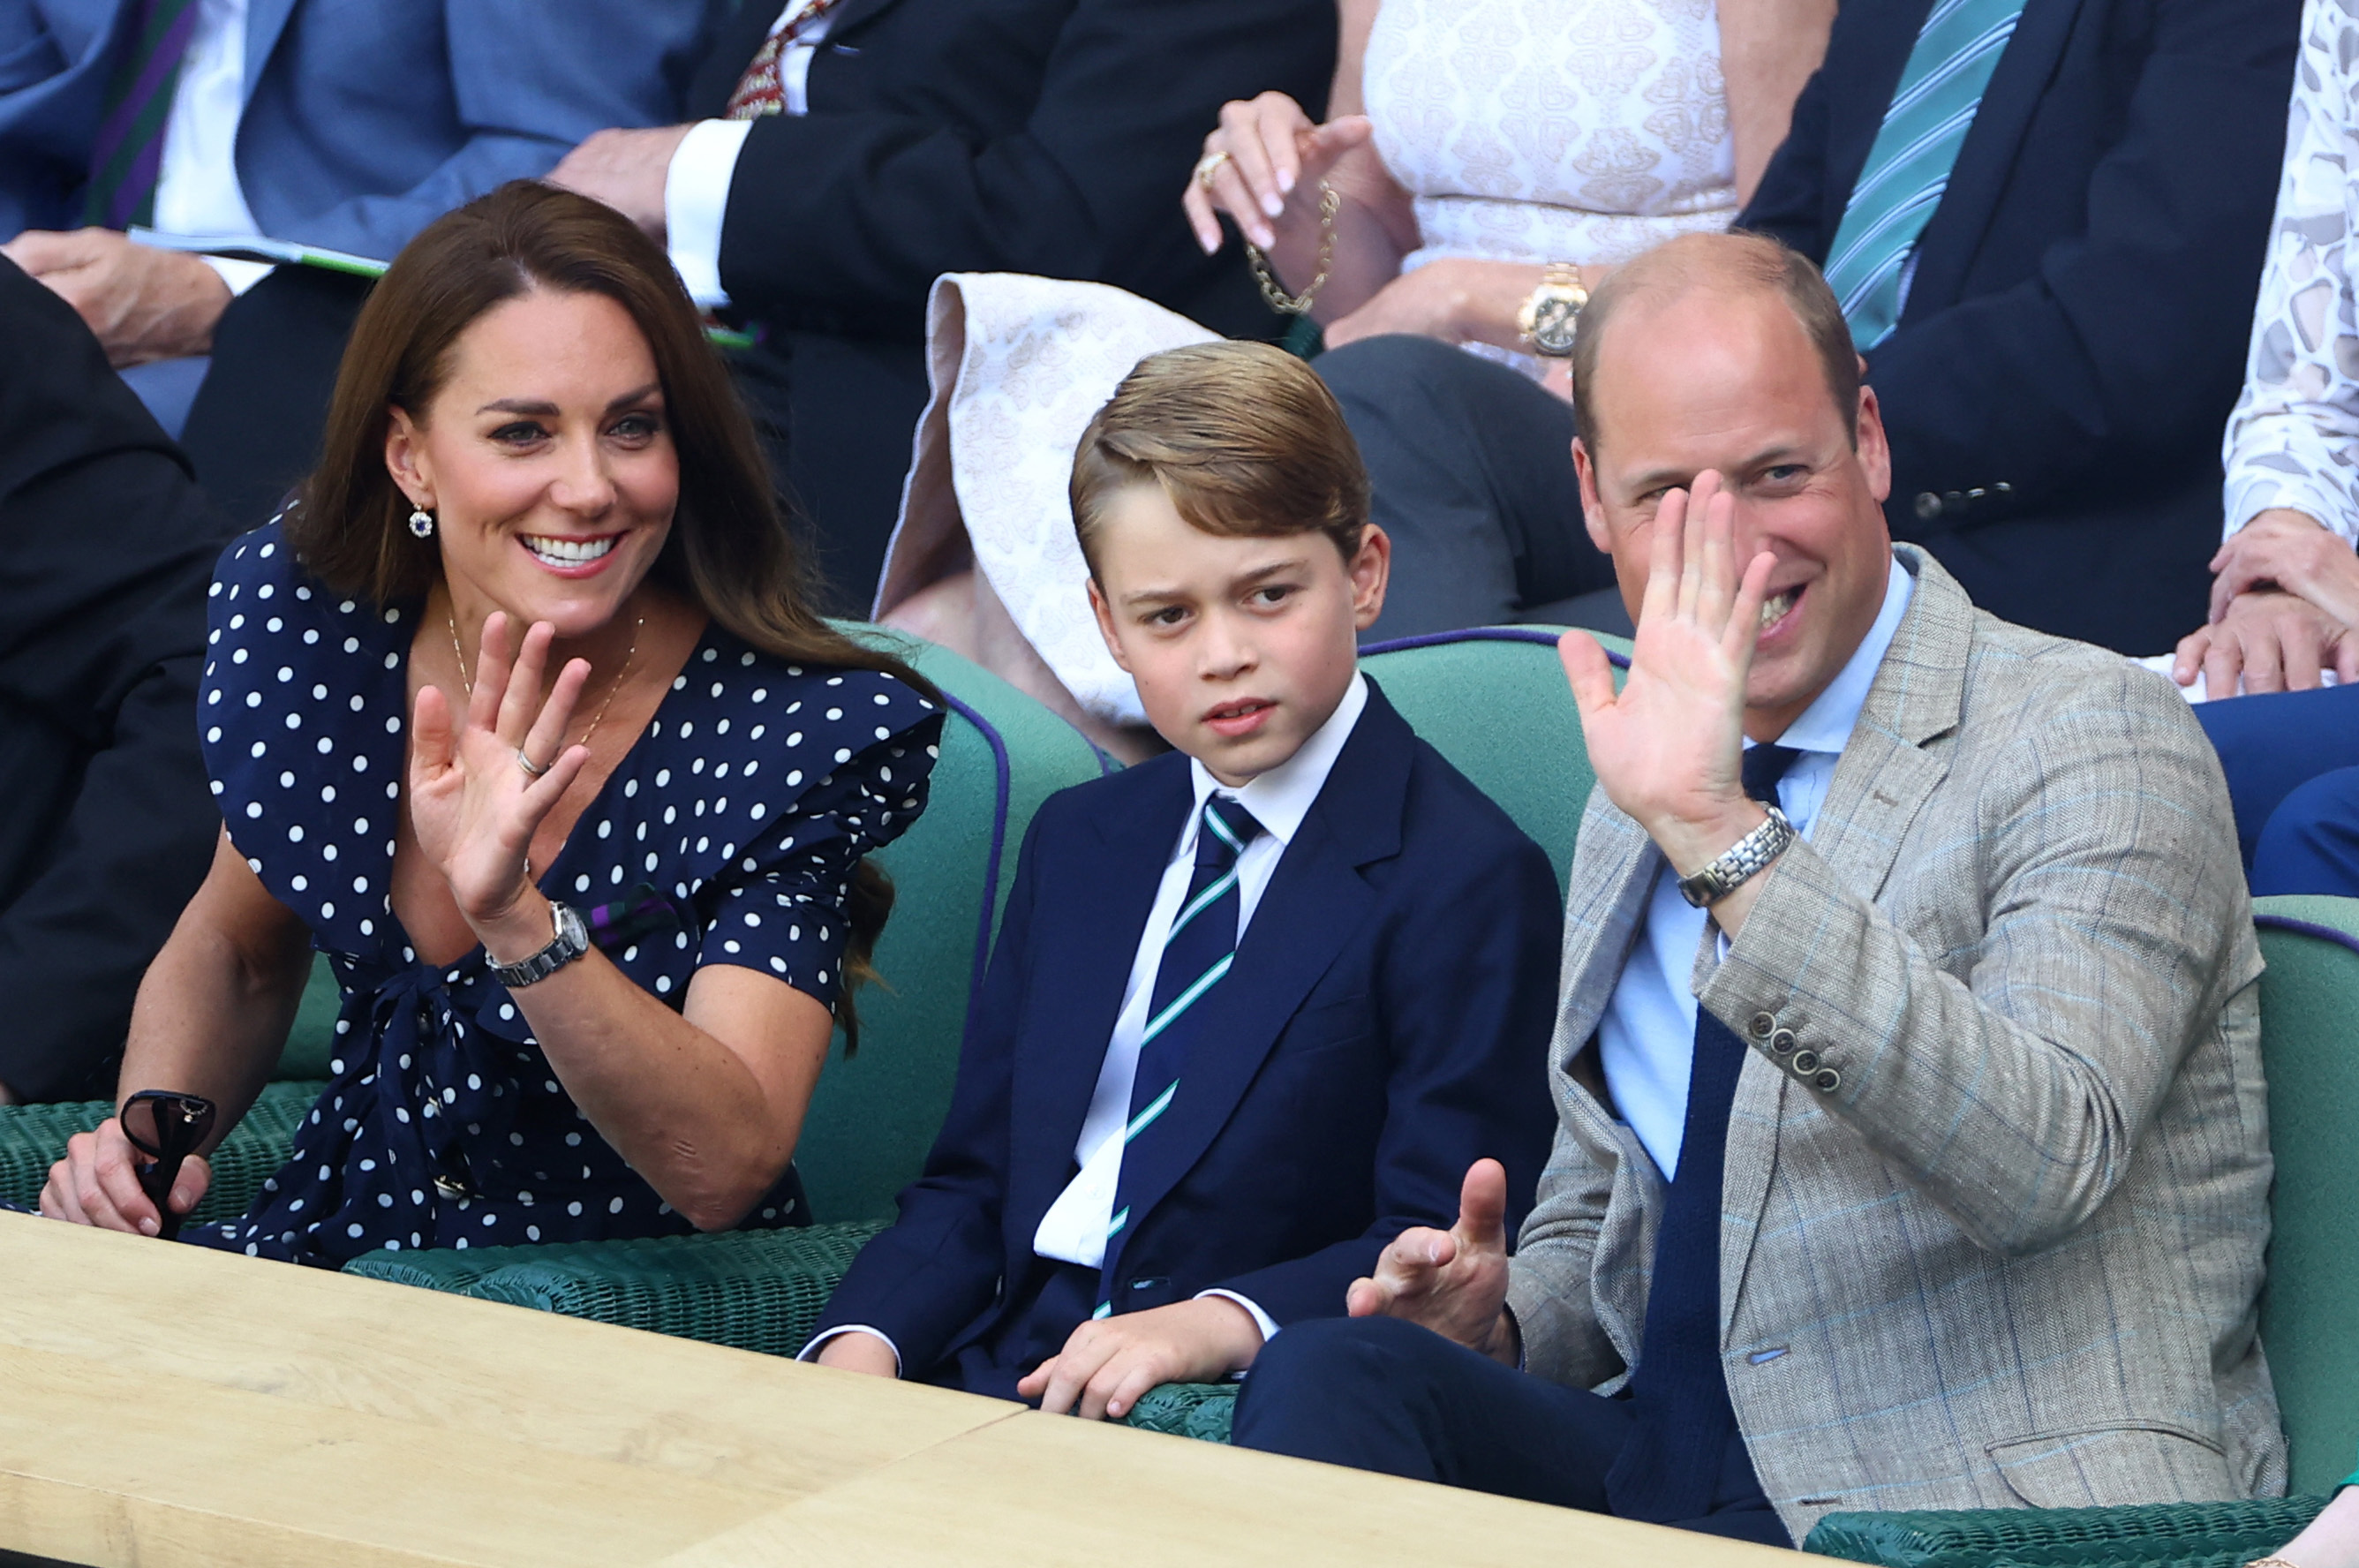 Tennis - Wimbledon - All England Lawn Tennis and Croquet Club, London, Britain - July 10, 2022 Britain's Catherine, the Duchess of Cambridge and Britain's Prince William, Duke of Cambridge and their son Prince George in the royal box ahead of the men's si